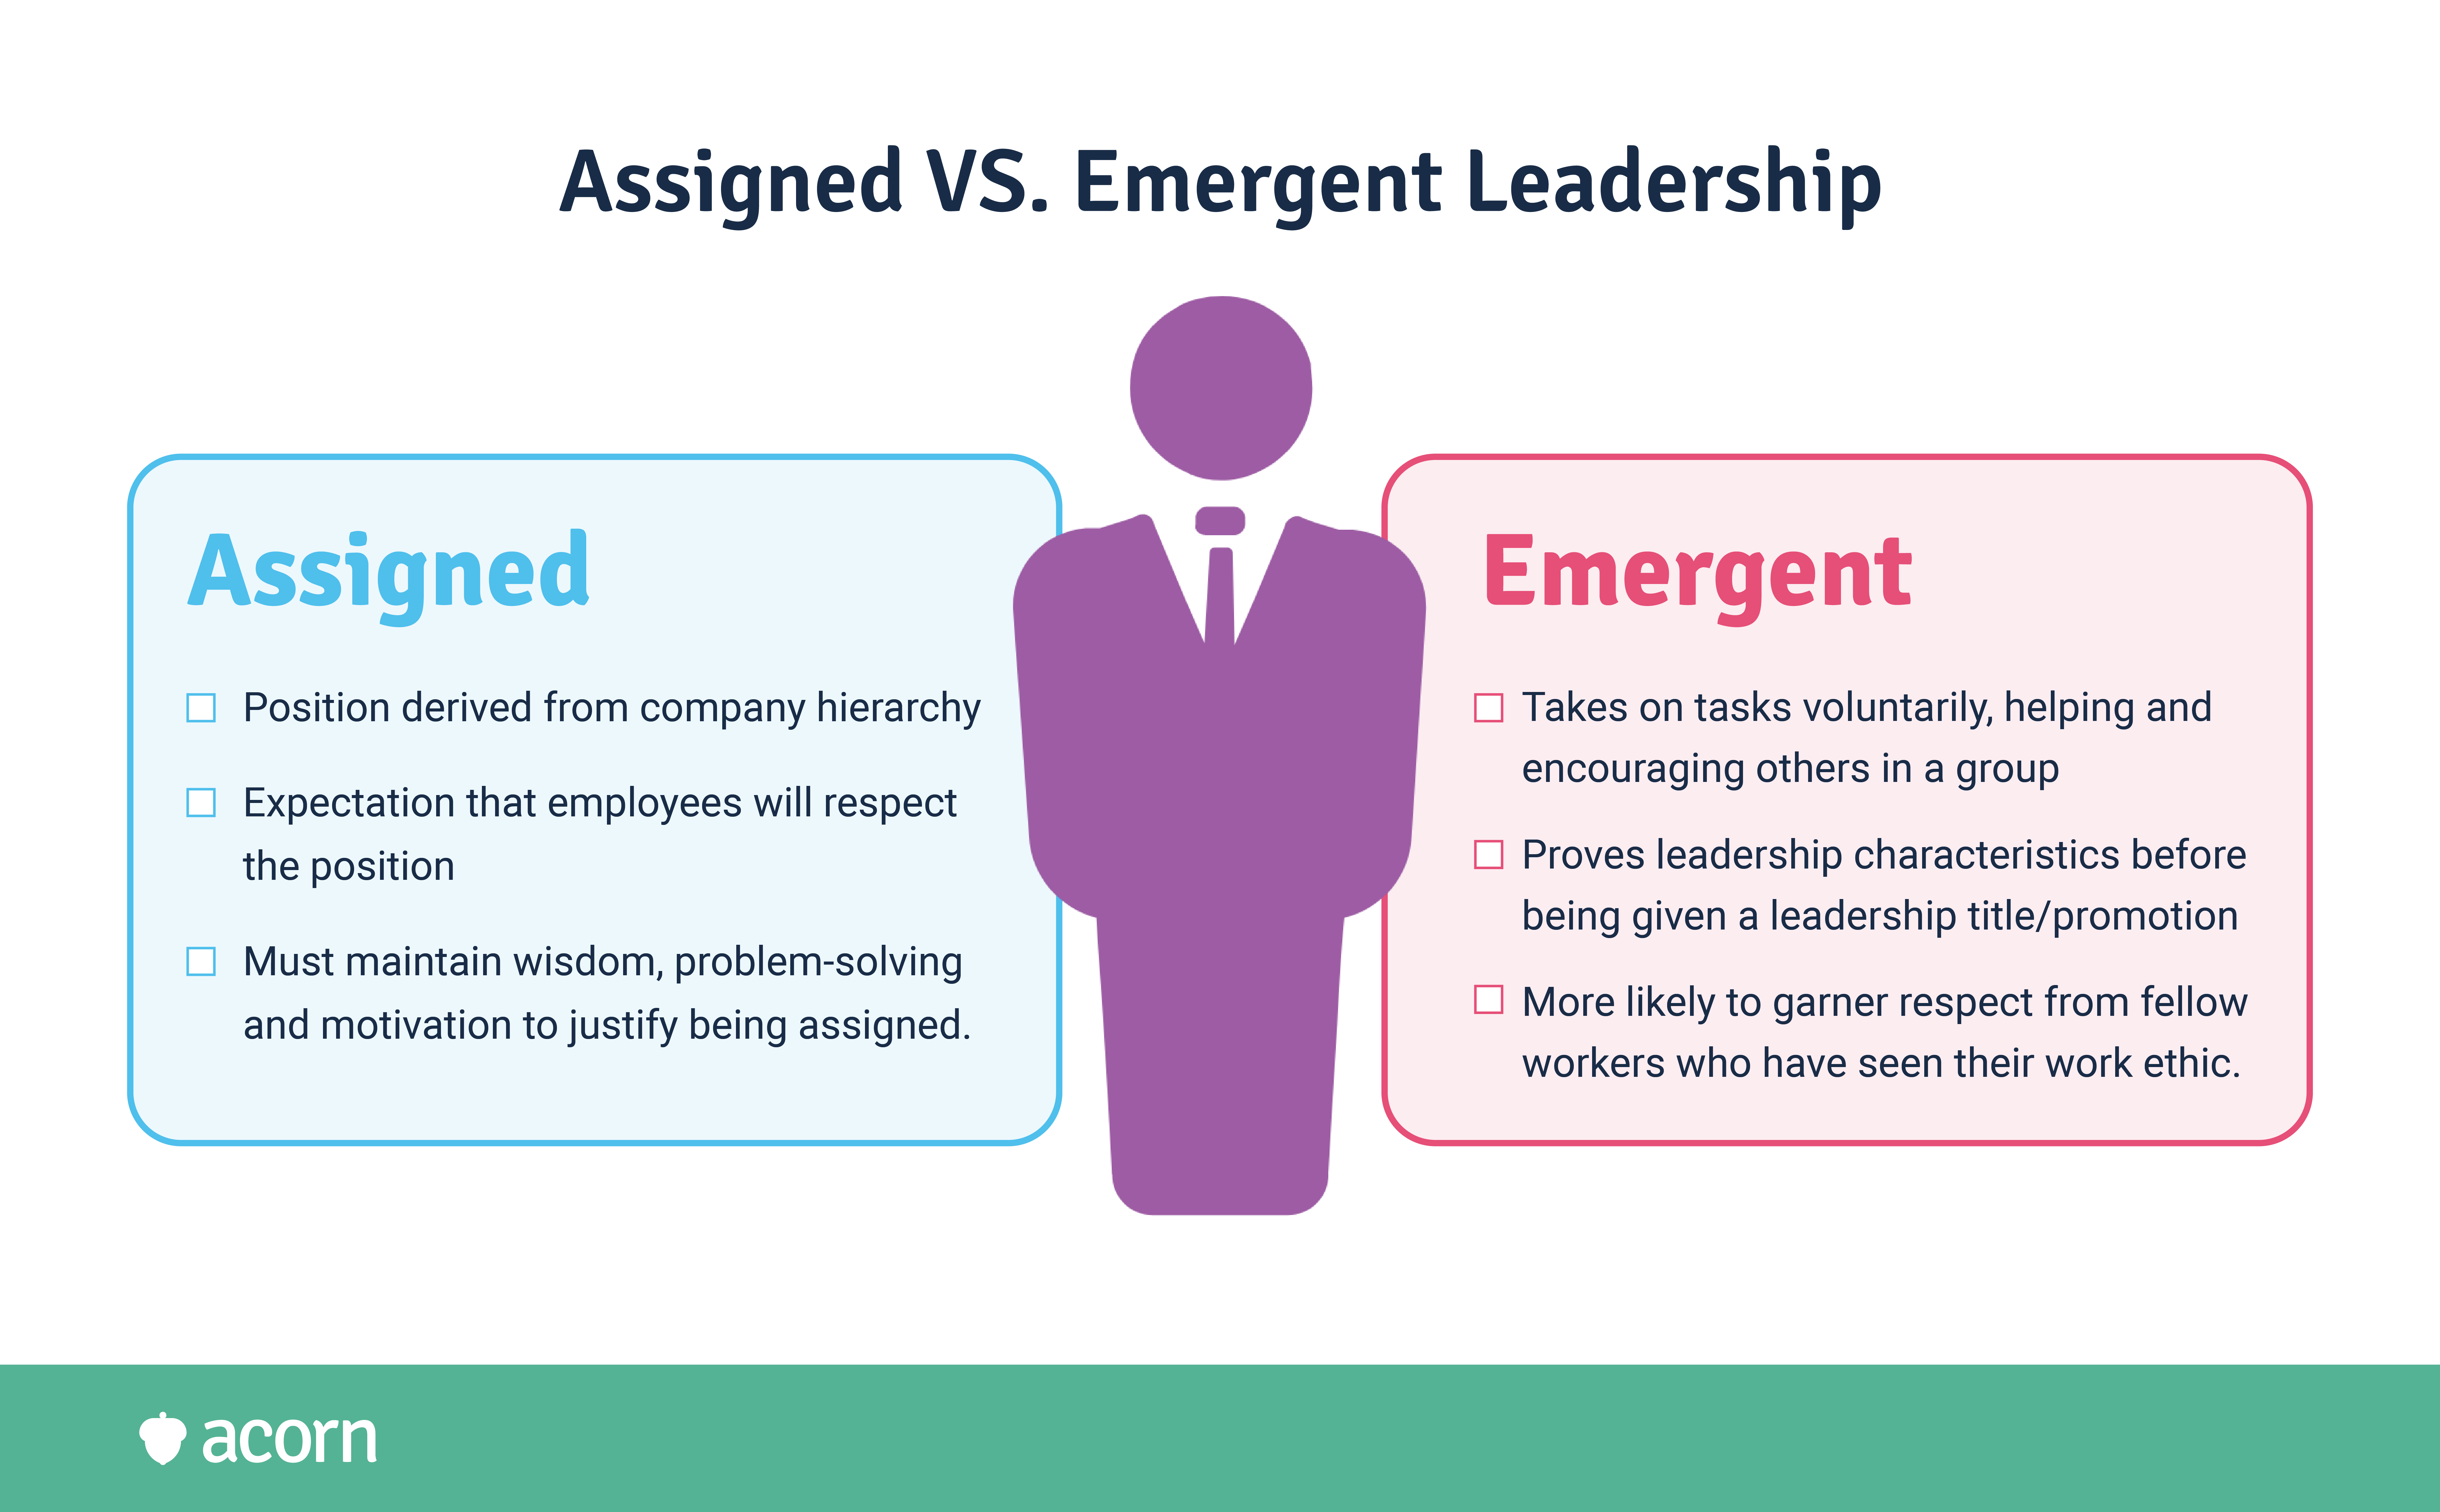 The difference between assigned and emergent leadership